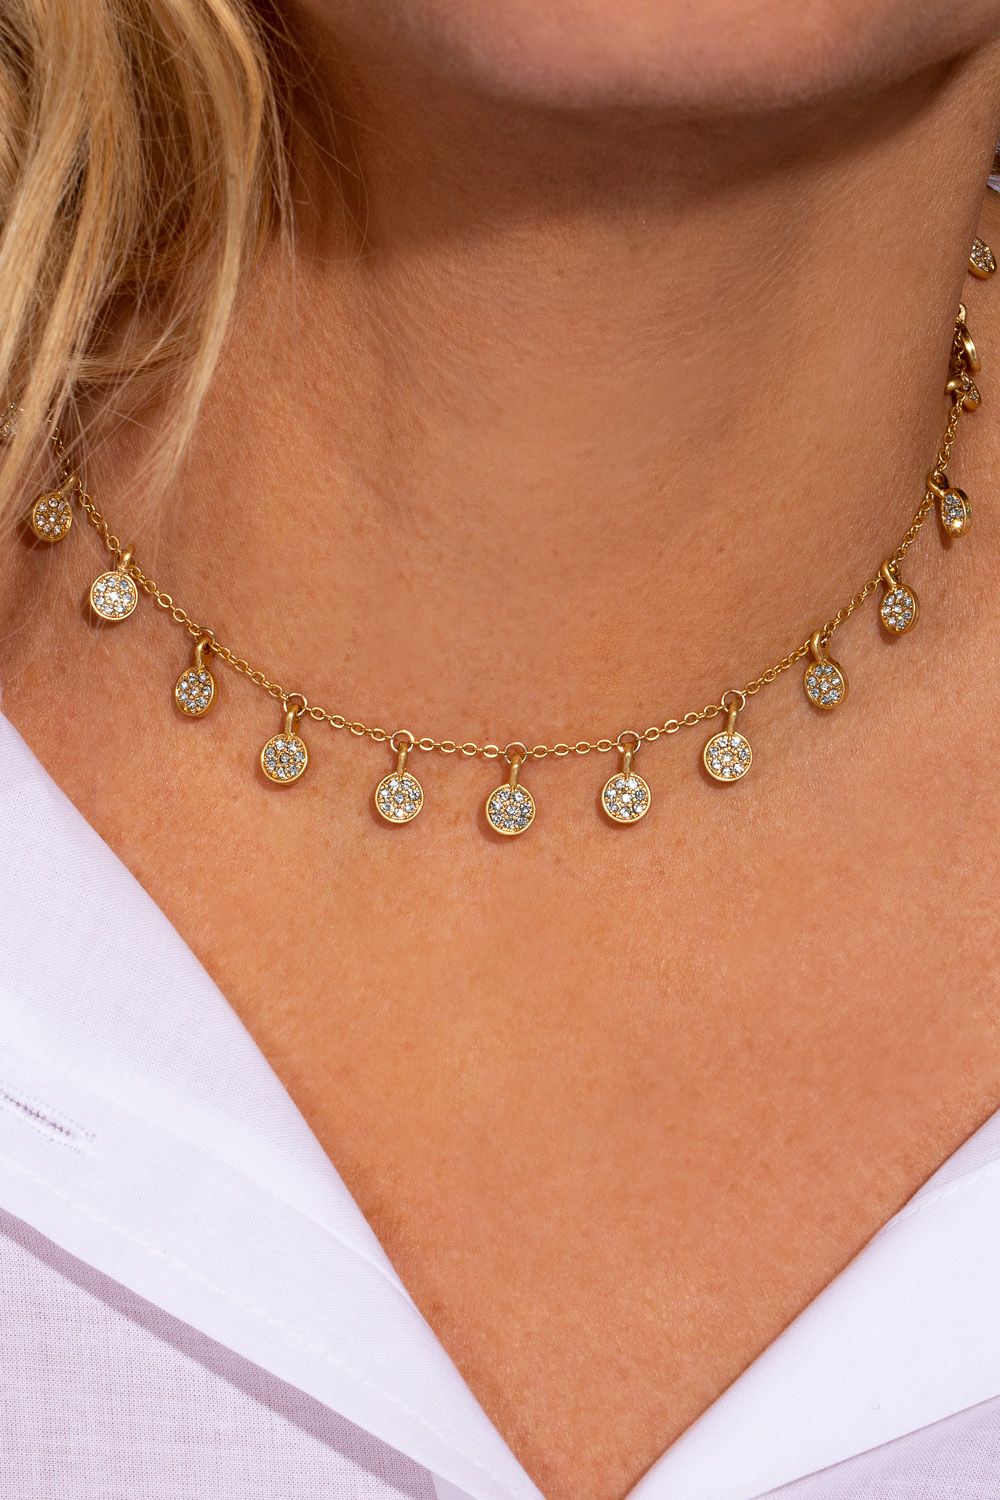 If you love your boho jewellery with a sparkly twist, this choker necklace has your name all over it! It features a dainty gold choker with miniature coins that dance across your neck. The gold plated necklace features pavé detailing with sparkling clear stones and it's perfect for layering with another longer necklace with a low neckline outfit, or over the top of a jumper during the day! It measures 15 inches and comes with a 3 inch extender. The Boho pave choker necklace is designed as a laid back piece with a glamorous twist that you can wear with so many looks!